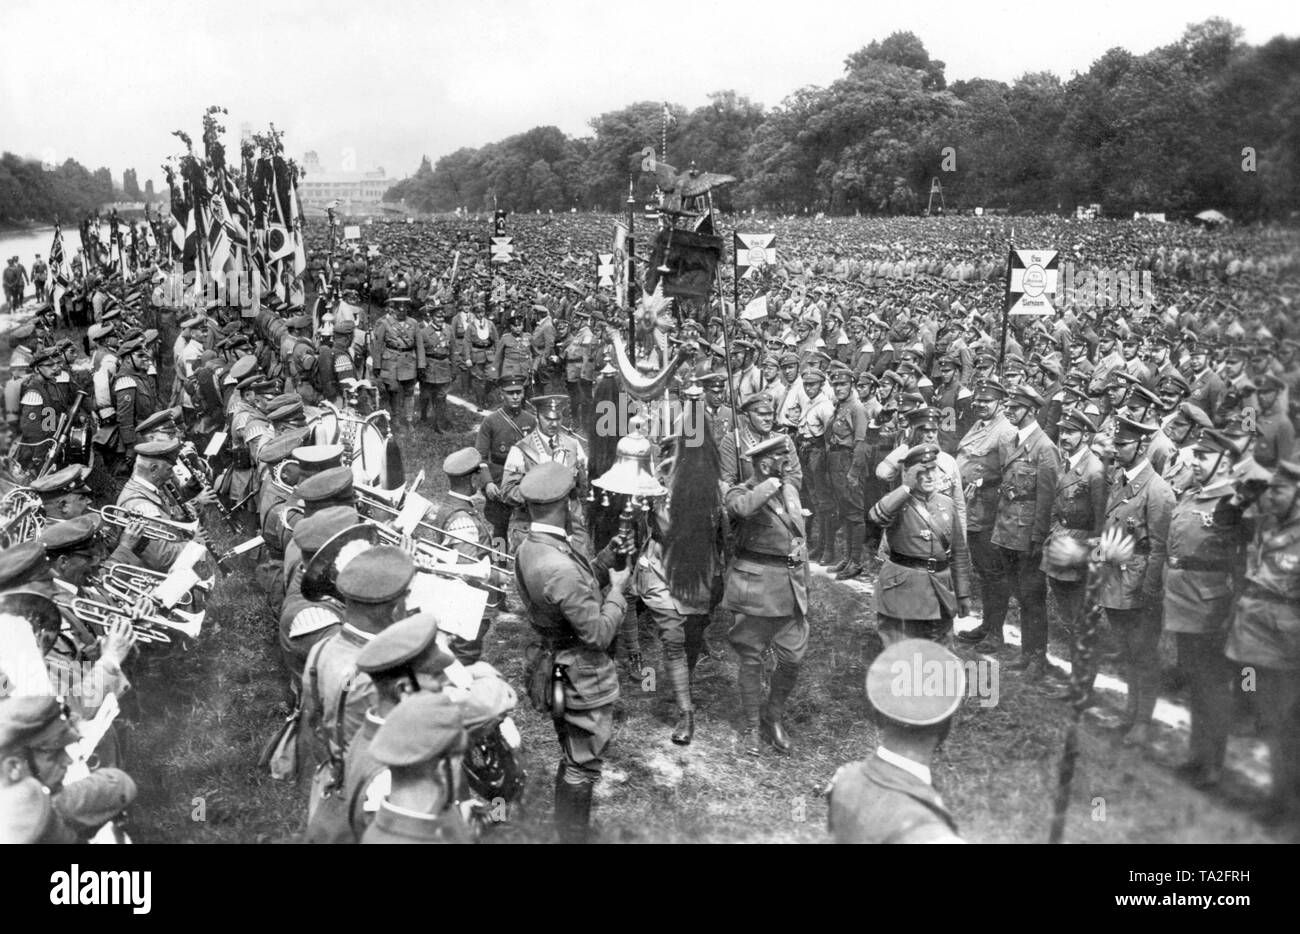 At the beginning of June, more than 100,000 members of the Stahlhelm gathered in Munich. The highlight of the event was the demonstration of the 100,000 members on the Isarwiesen and the march past of the Stahlhelm leaders Franz Seldte and Theodor Duesterberg. In the first row of the Gaue Potsdam, the Princes of Hohenzollern, Eitel Friedrich, August Wilhelm, and Oskar of Prussia. On the left a marching band is playing while Seldte and Duesterberg pass by and salute. Stock Photo